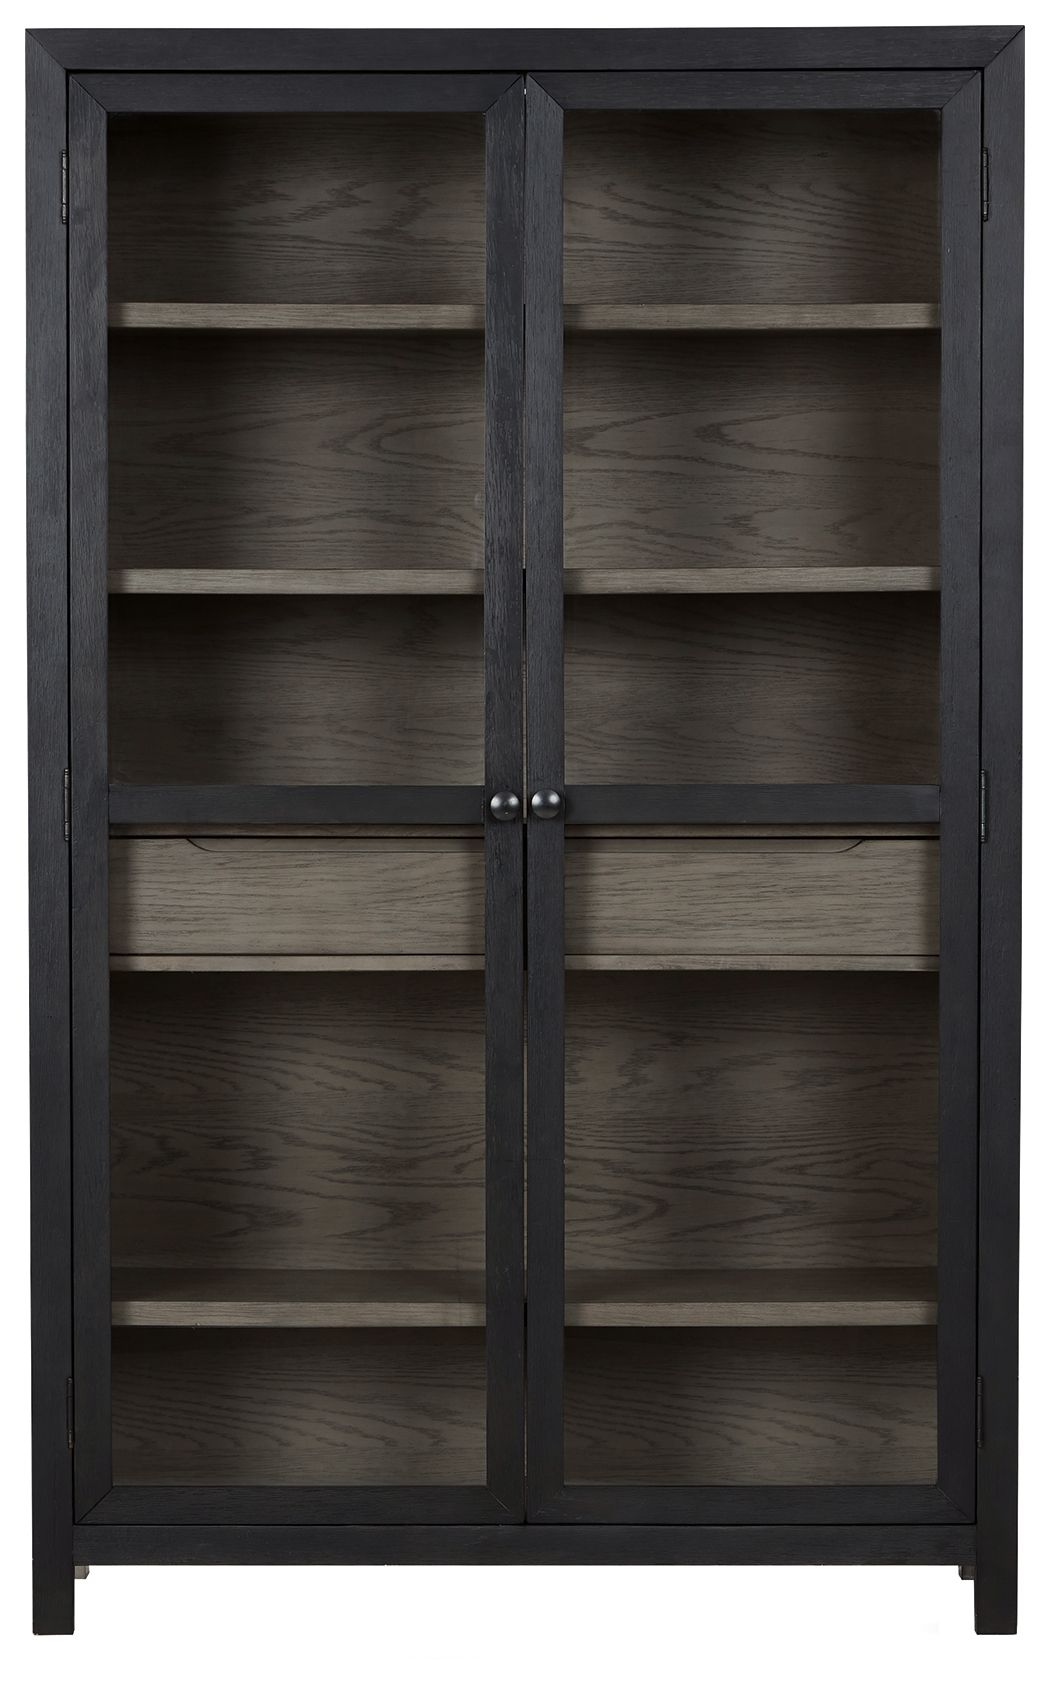 Lenston - Accent Cabinet - Tony's Home Furnishings